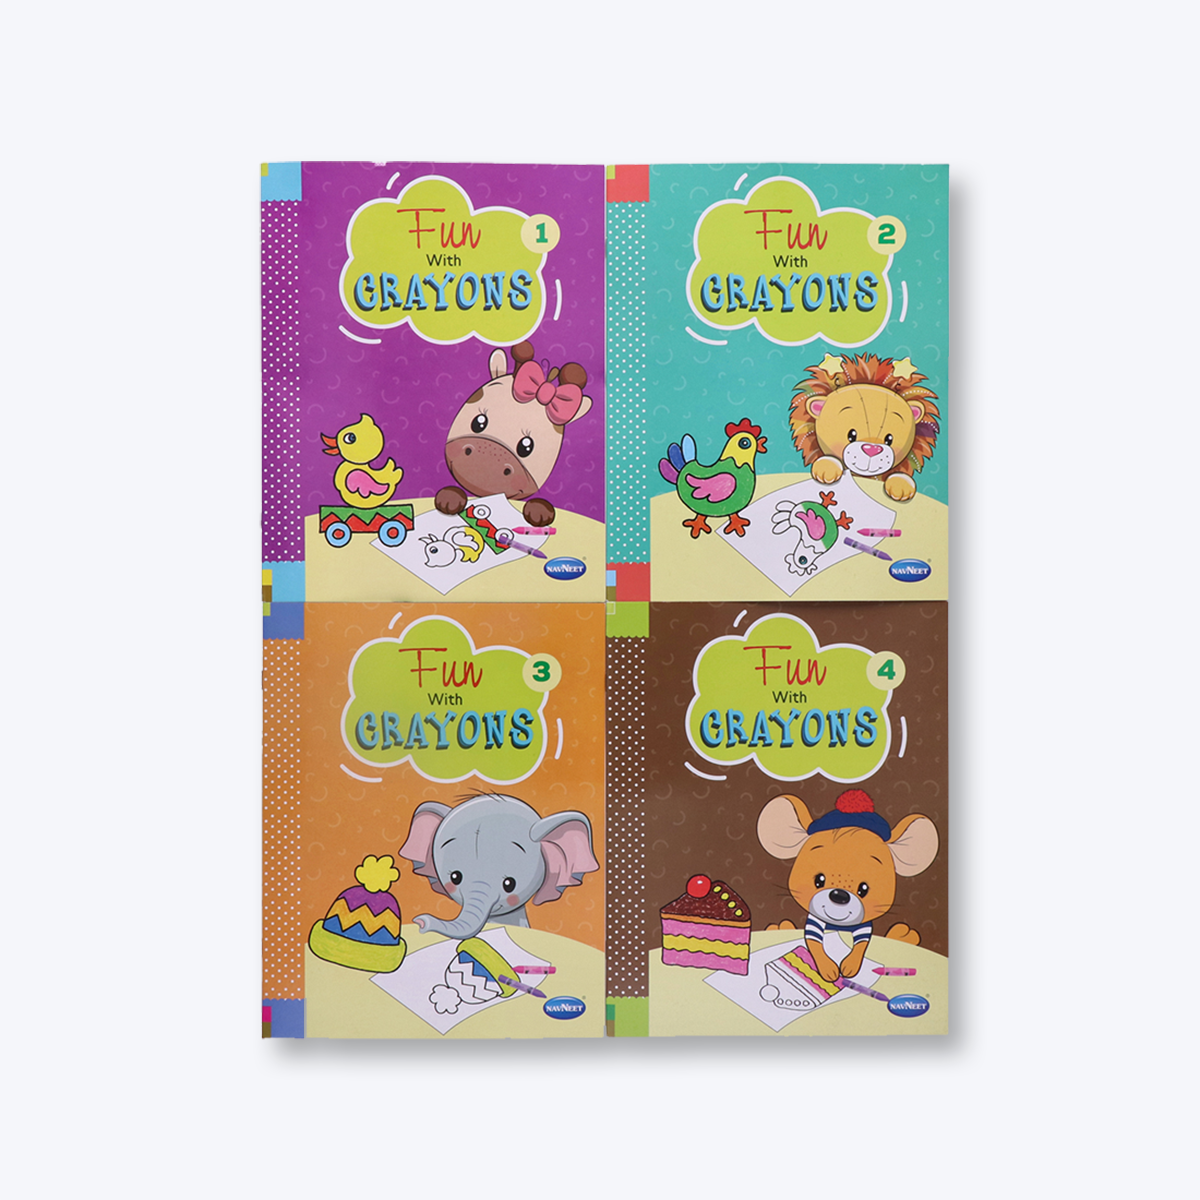 Navneet Fun with Crayons series set of 4 books with different images